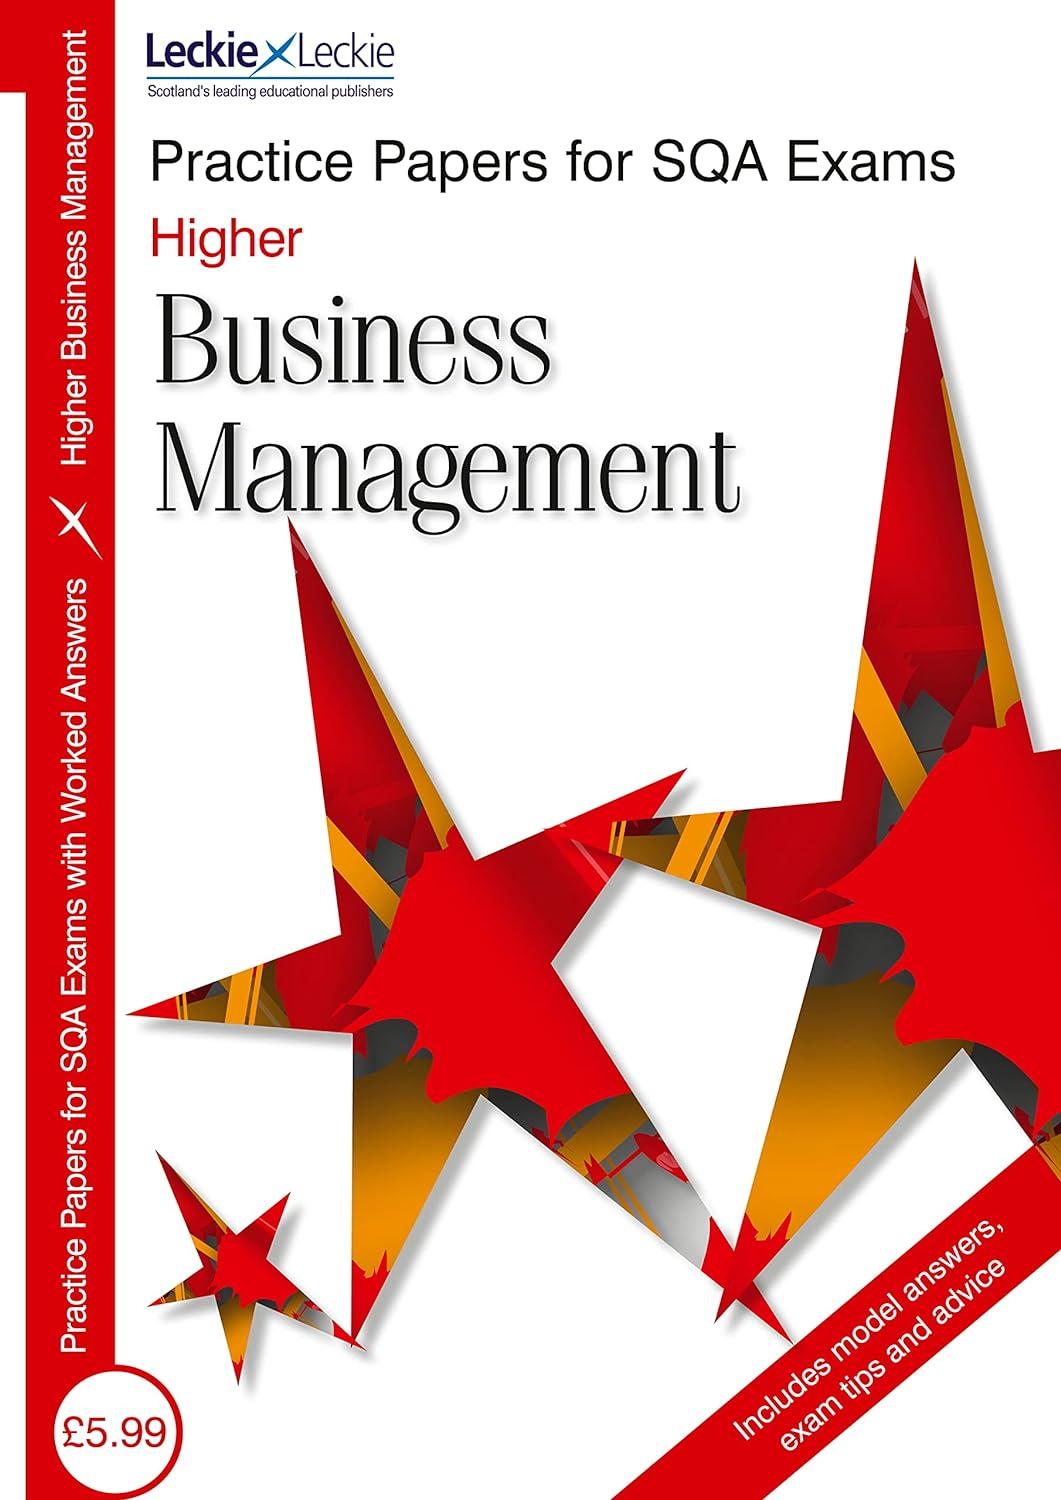 higher business management practice papers for sqa exams 1st edition lee coutts 1843728001, 978-1843728009